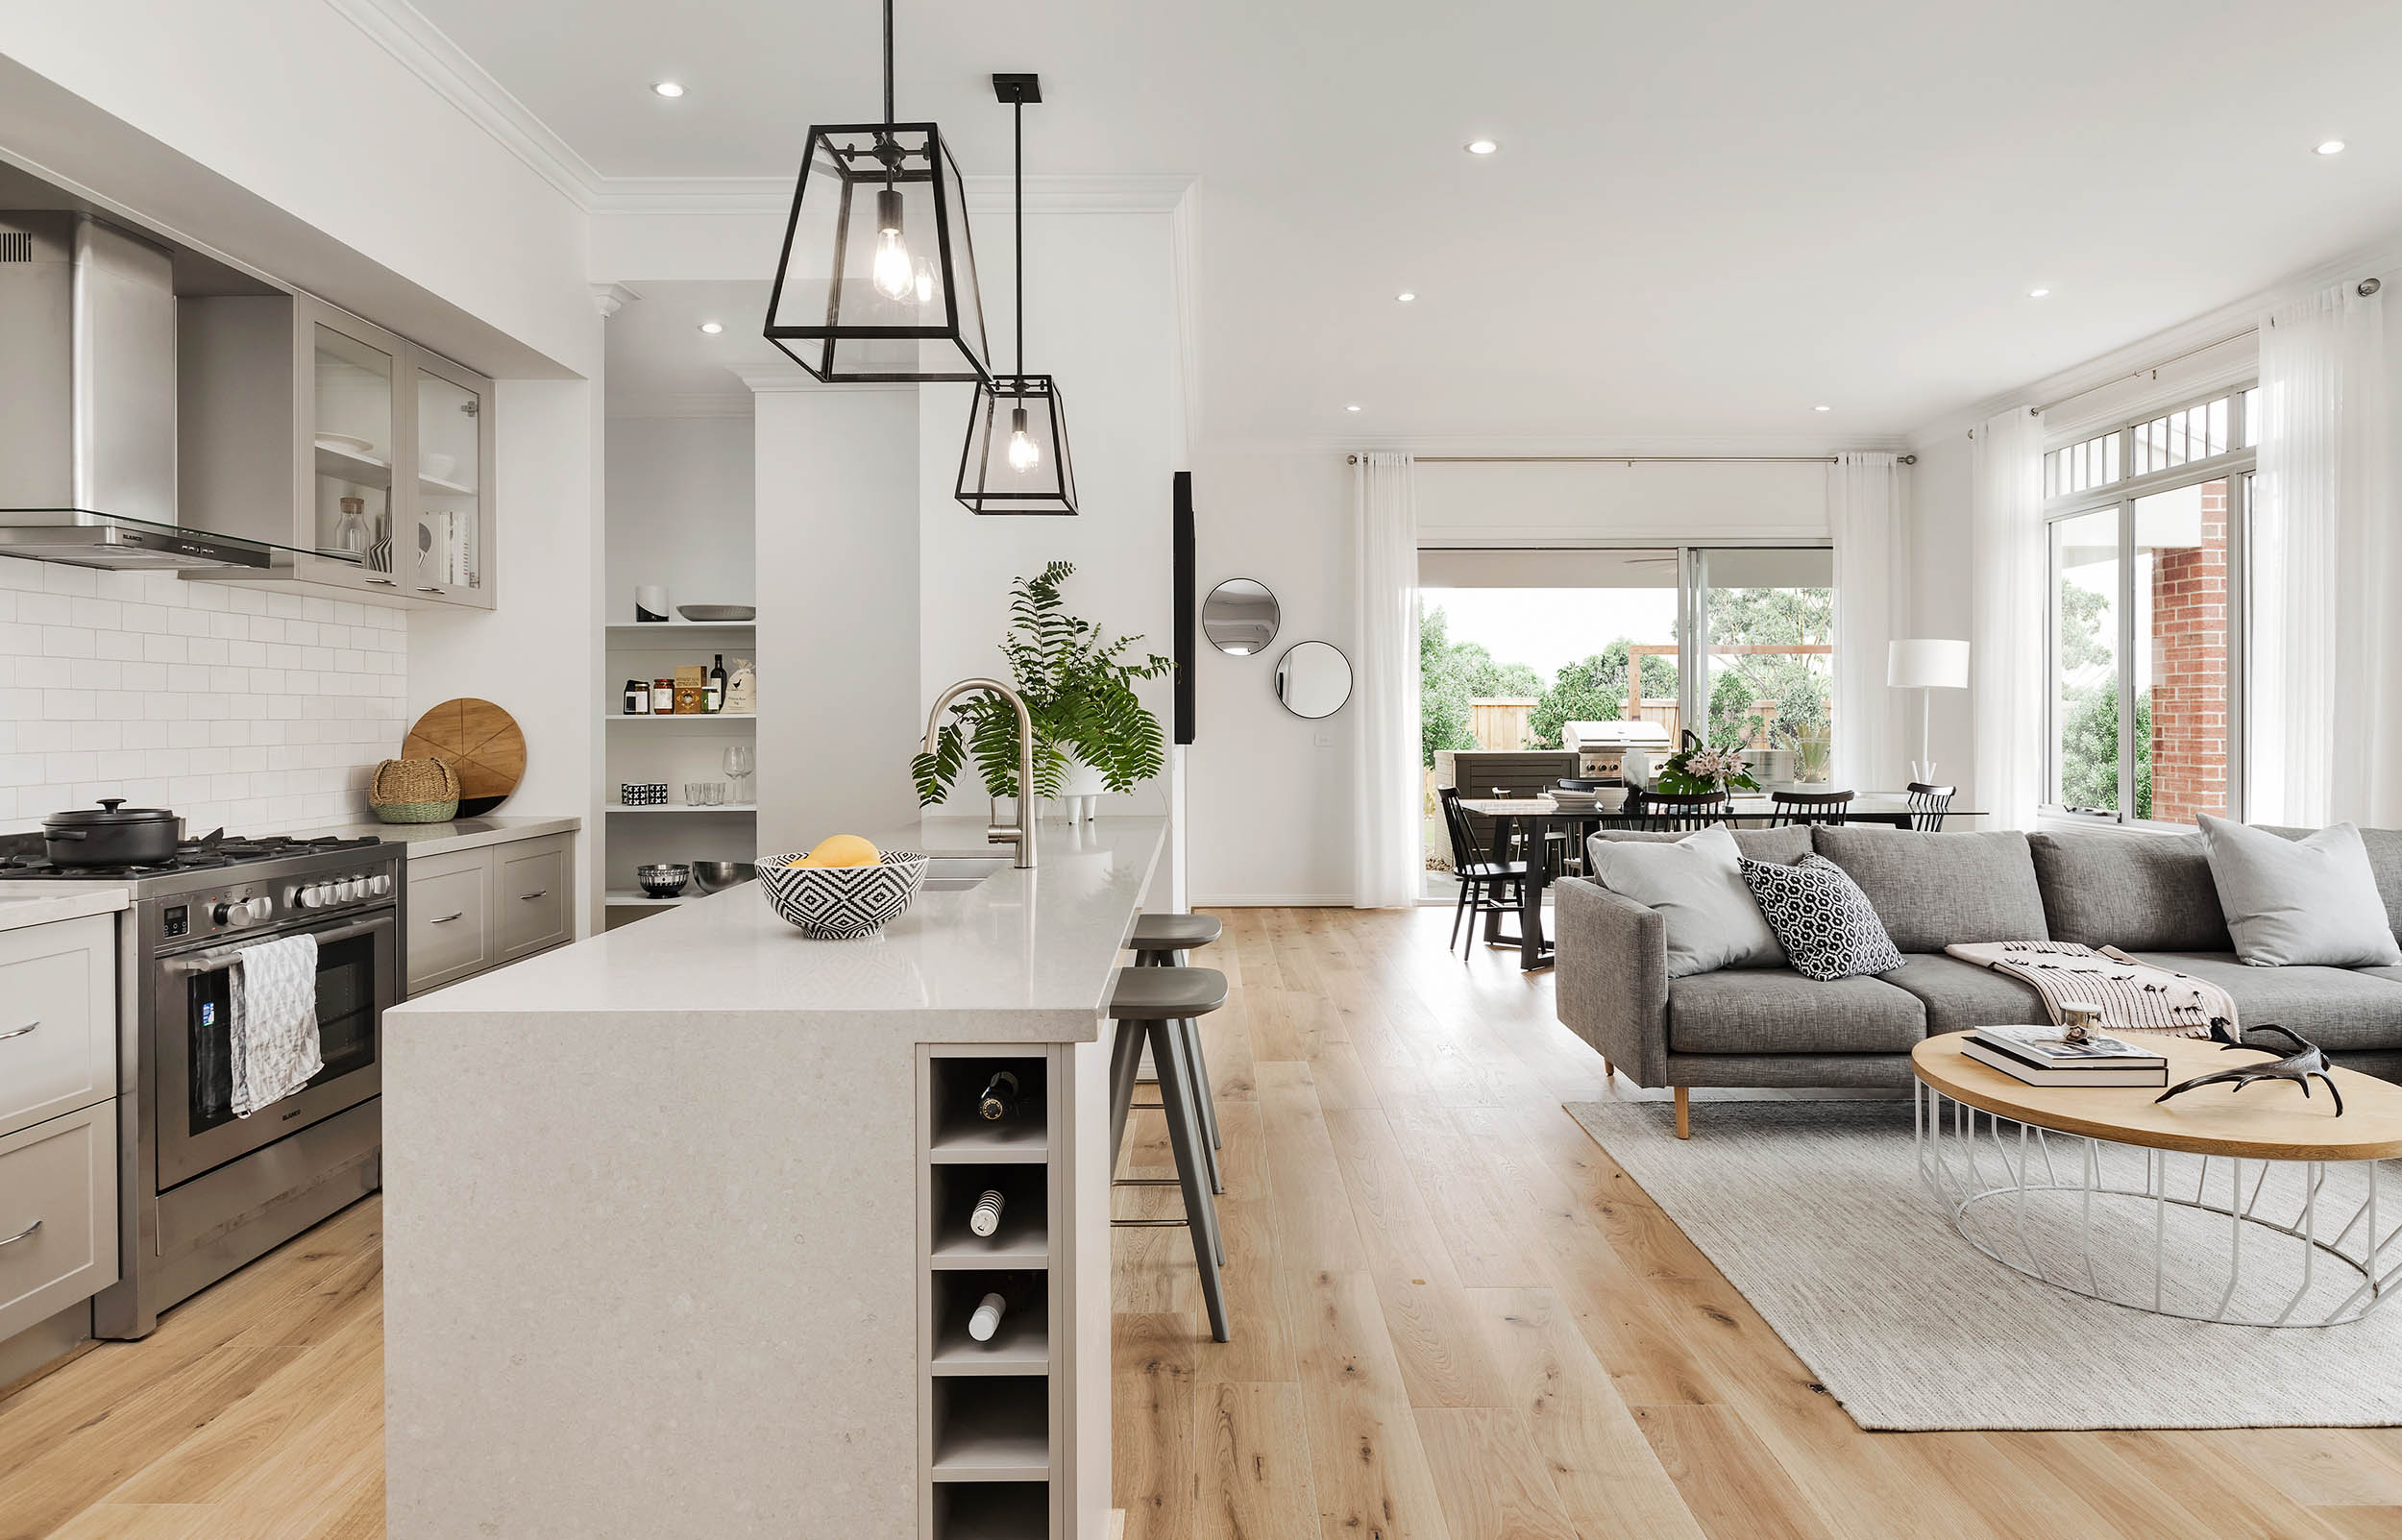 House and Land Merrifield At Nostra Homes, we can create a home and land package to suit your lifestyle at Aspire Estate in Merrifield, Australia. For more info at https://nostrahomes.com.au/house_land.php by Nostrahomes